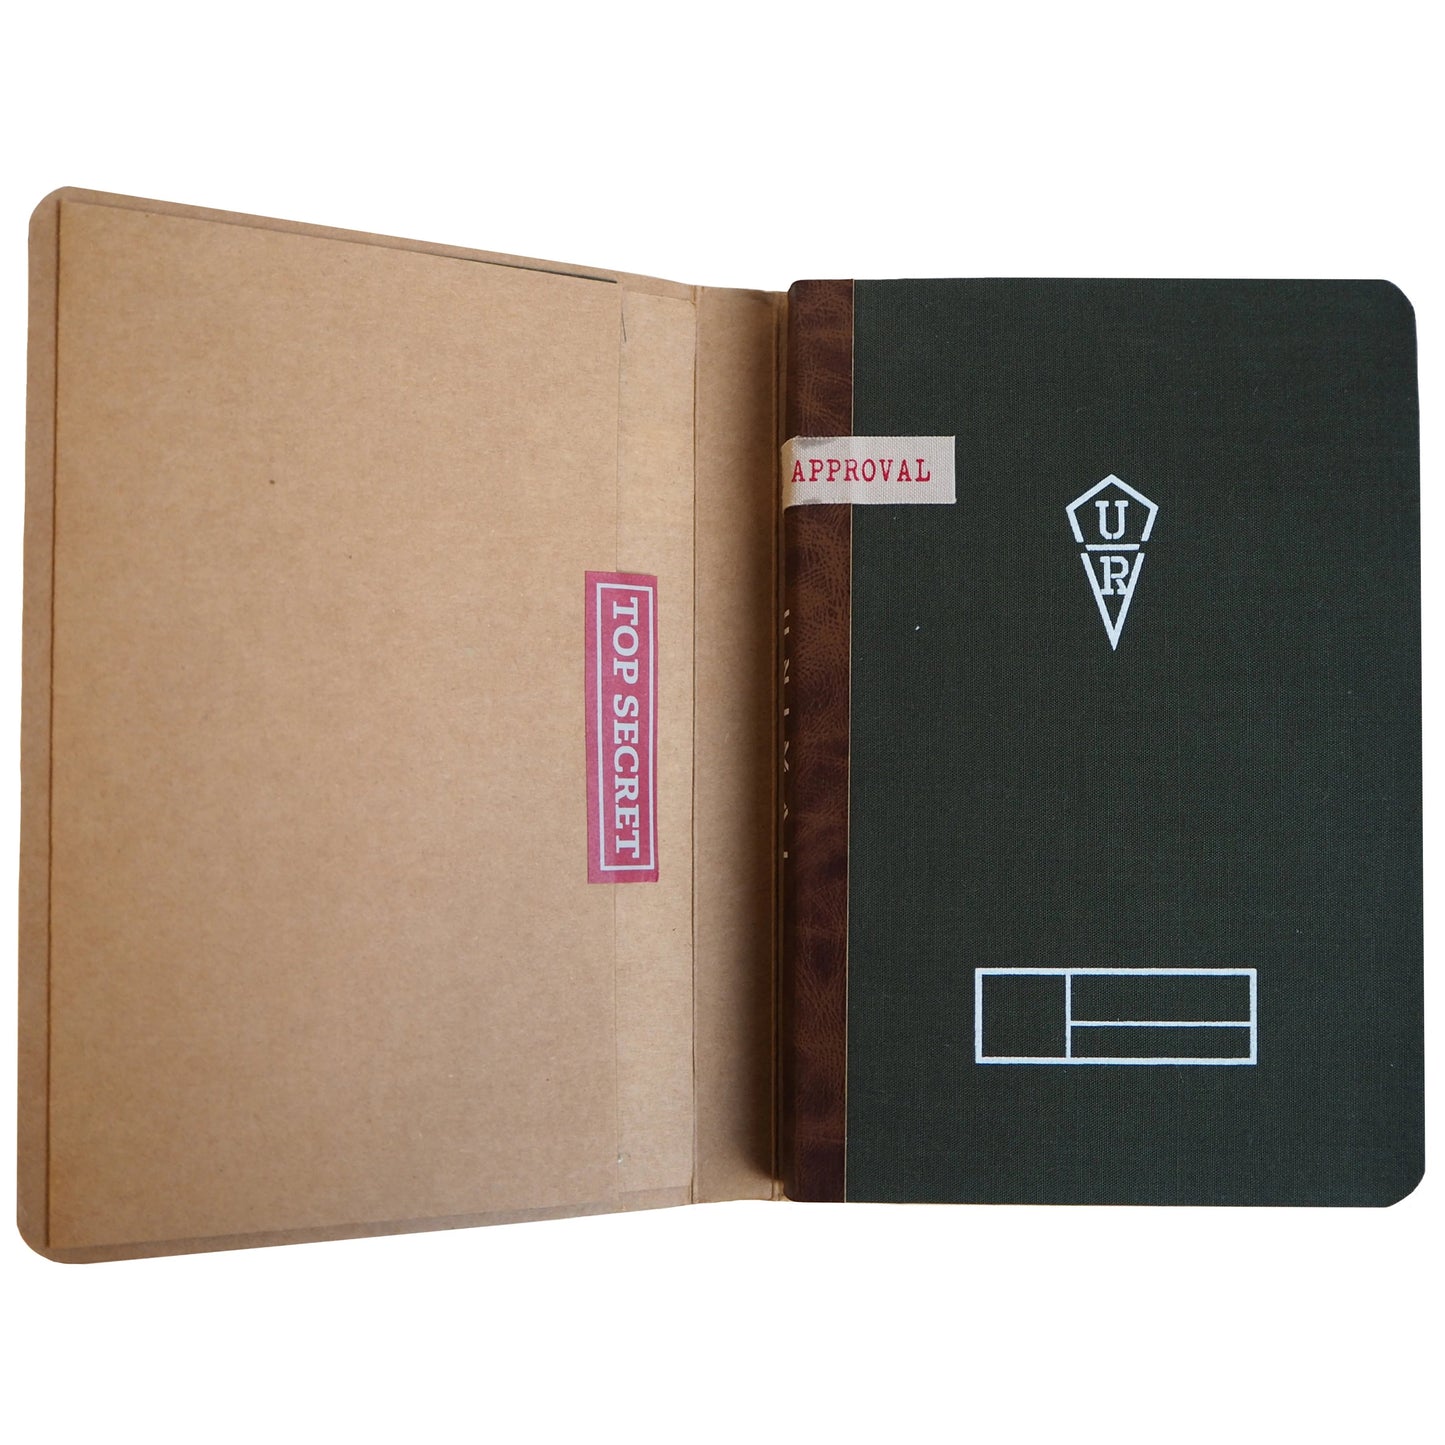 HUNT TOWN UNIMAL Notebook - Lion - Stationery - Lavender Home London